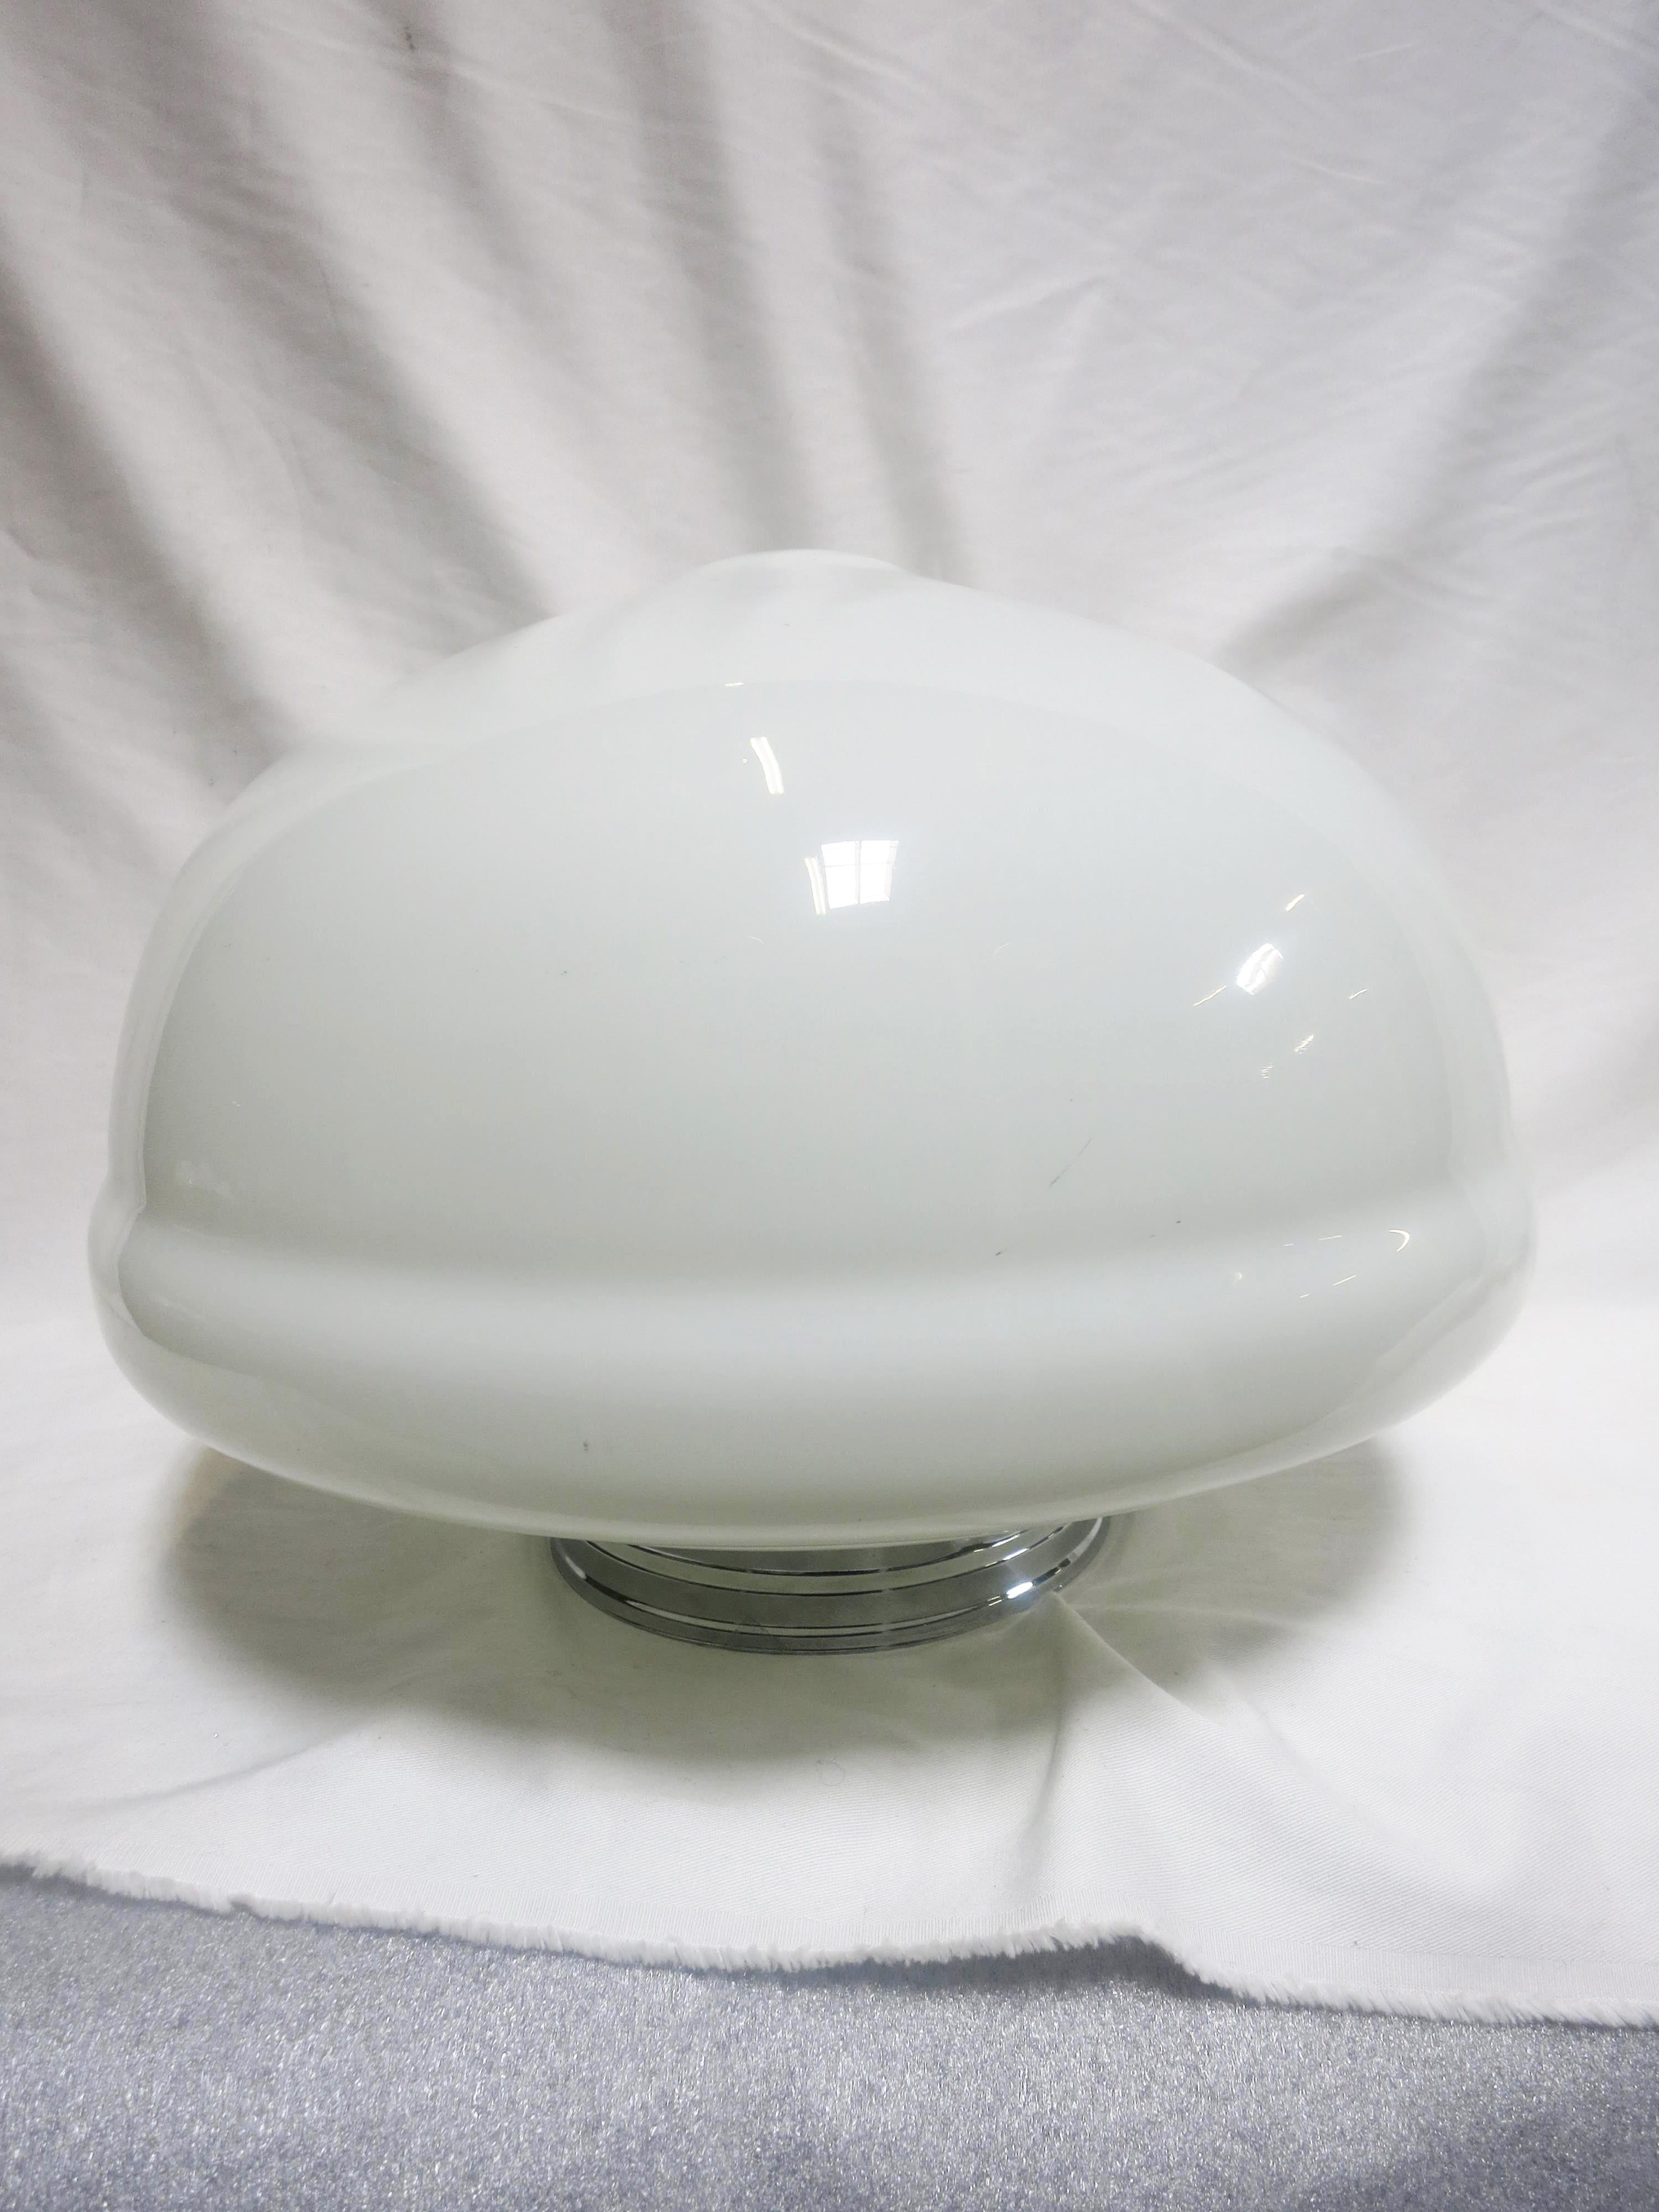 Once used everywhere from classrooms, libraries and courthouses alike, schoolhouse globes offered a practical and utilitarian design with solid, hard-working ambient lighting. Our globe features a bell shape in classic white milk glass that will add